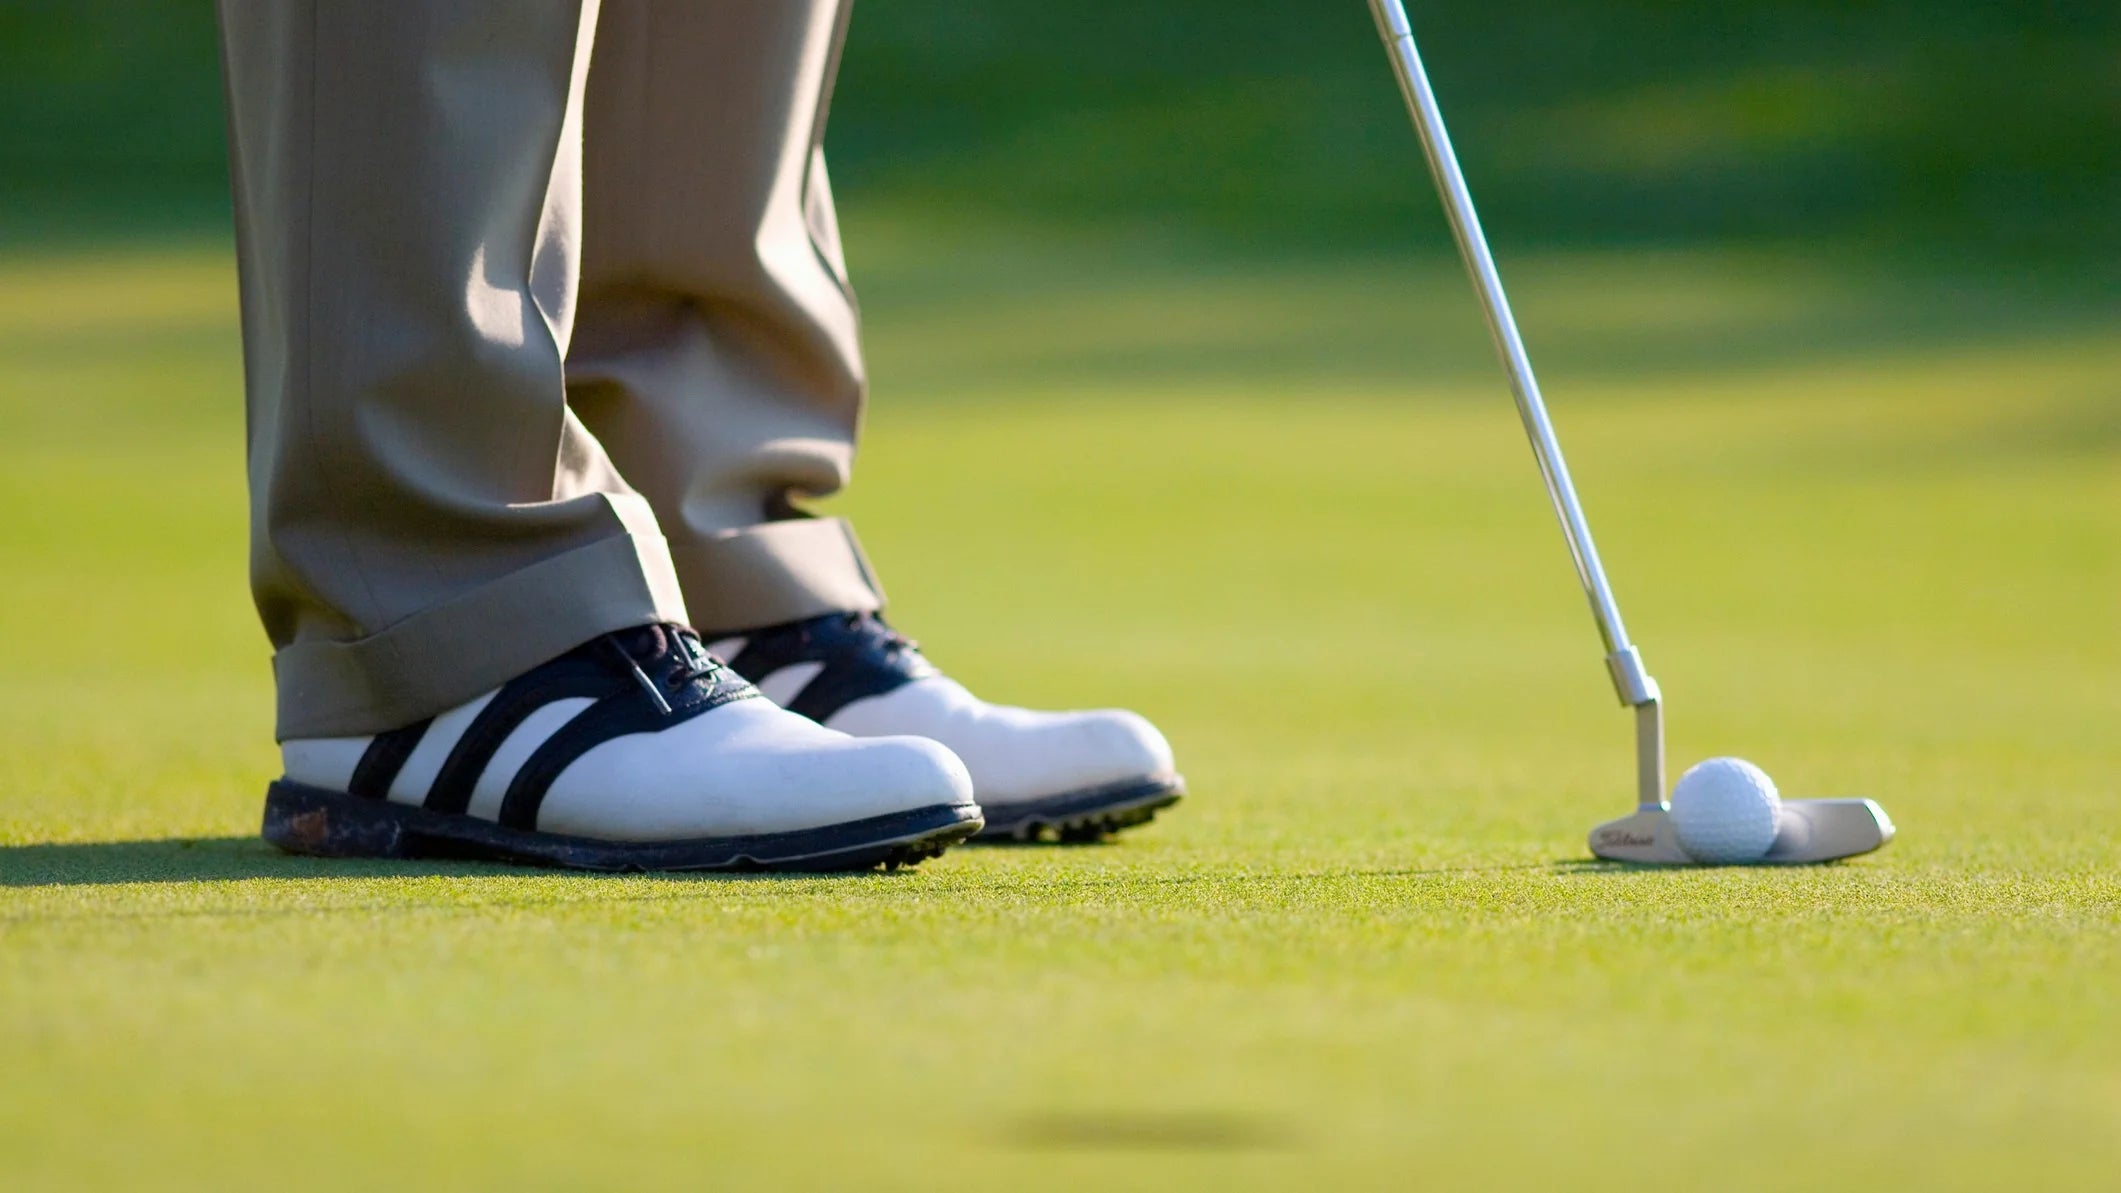 write a blog about The Top 10 Golf Shoes of the Year